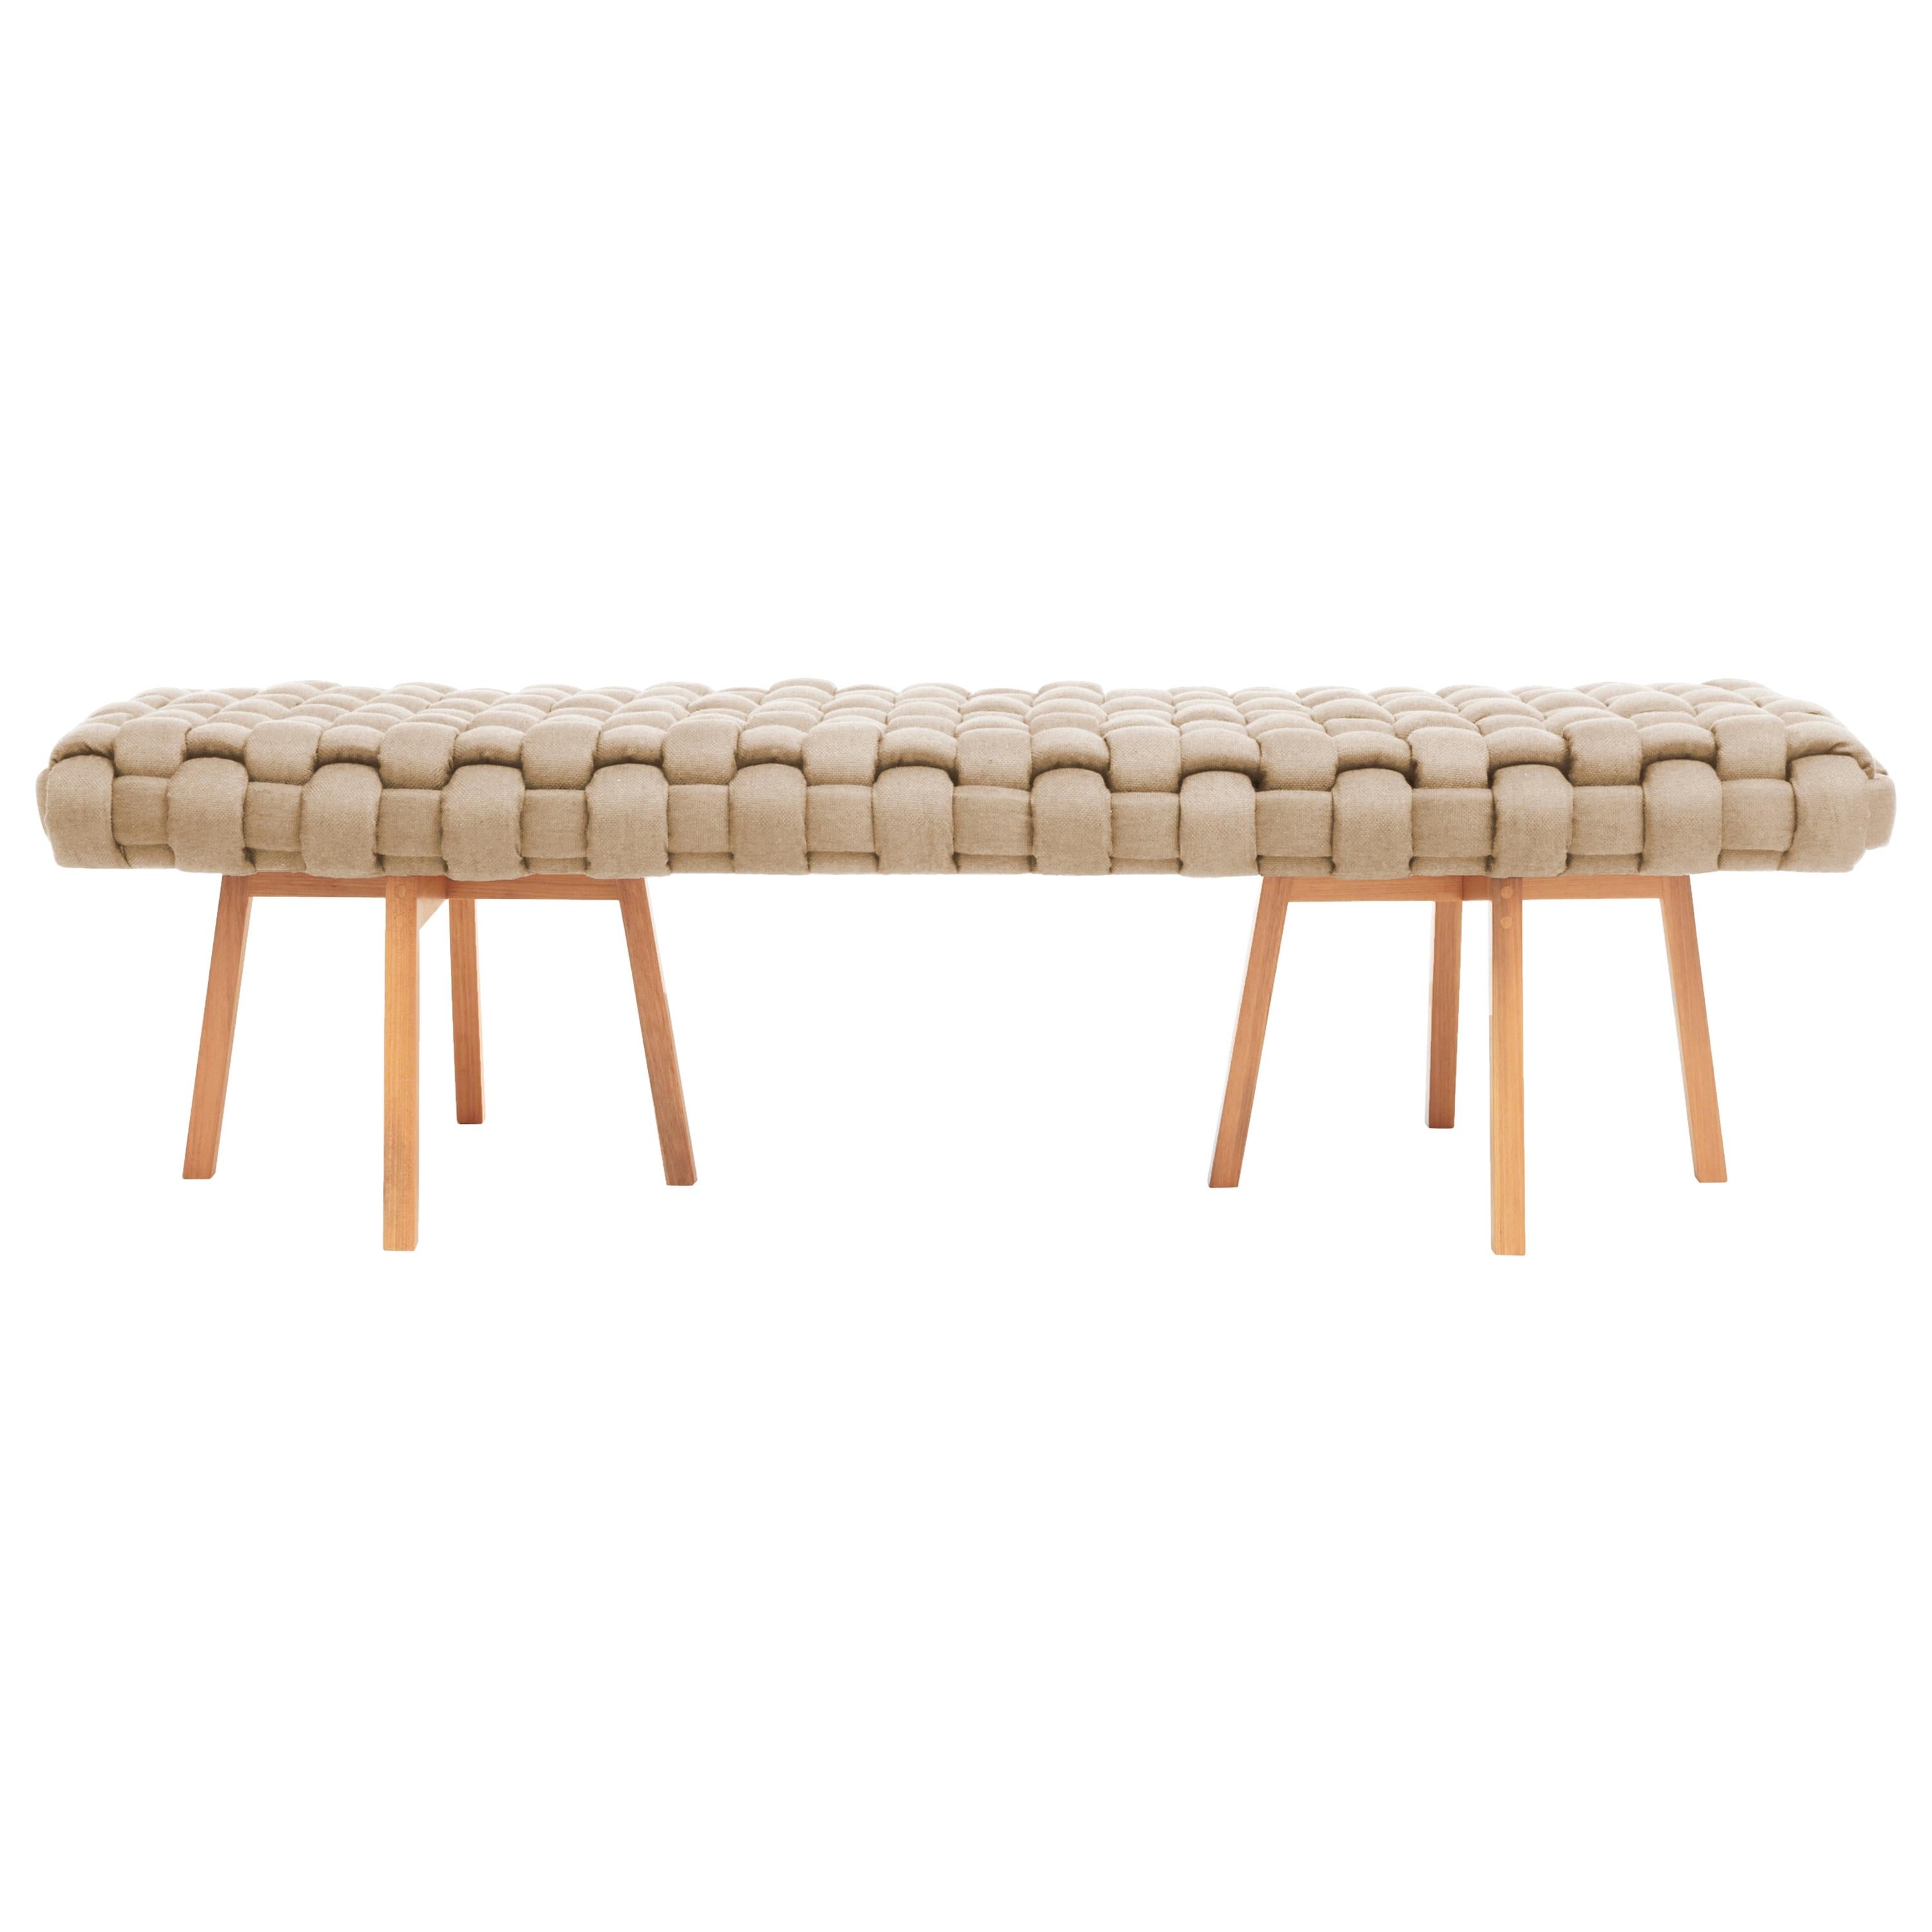 Contemporary Wood Bench, Handwoven Upholstery, the "Trama" CRU